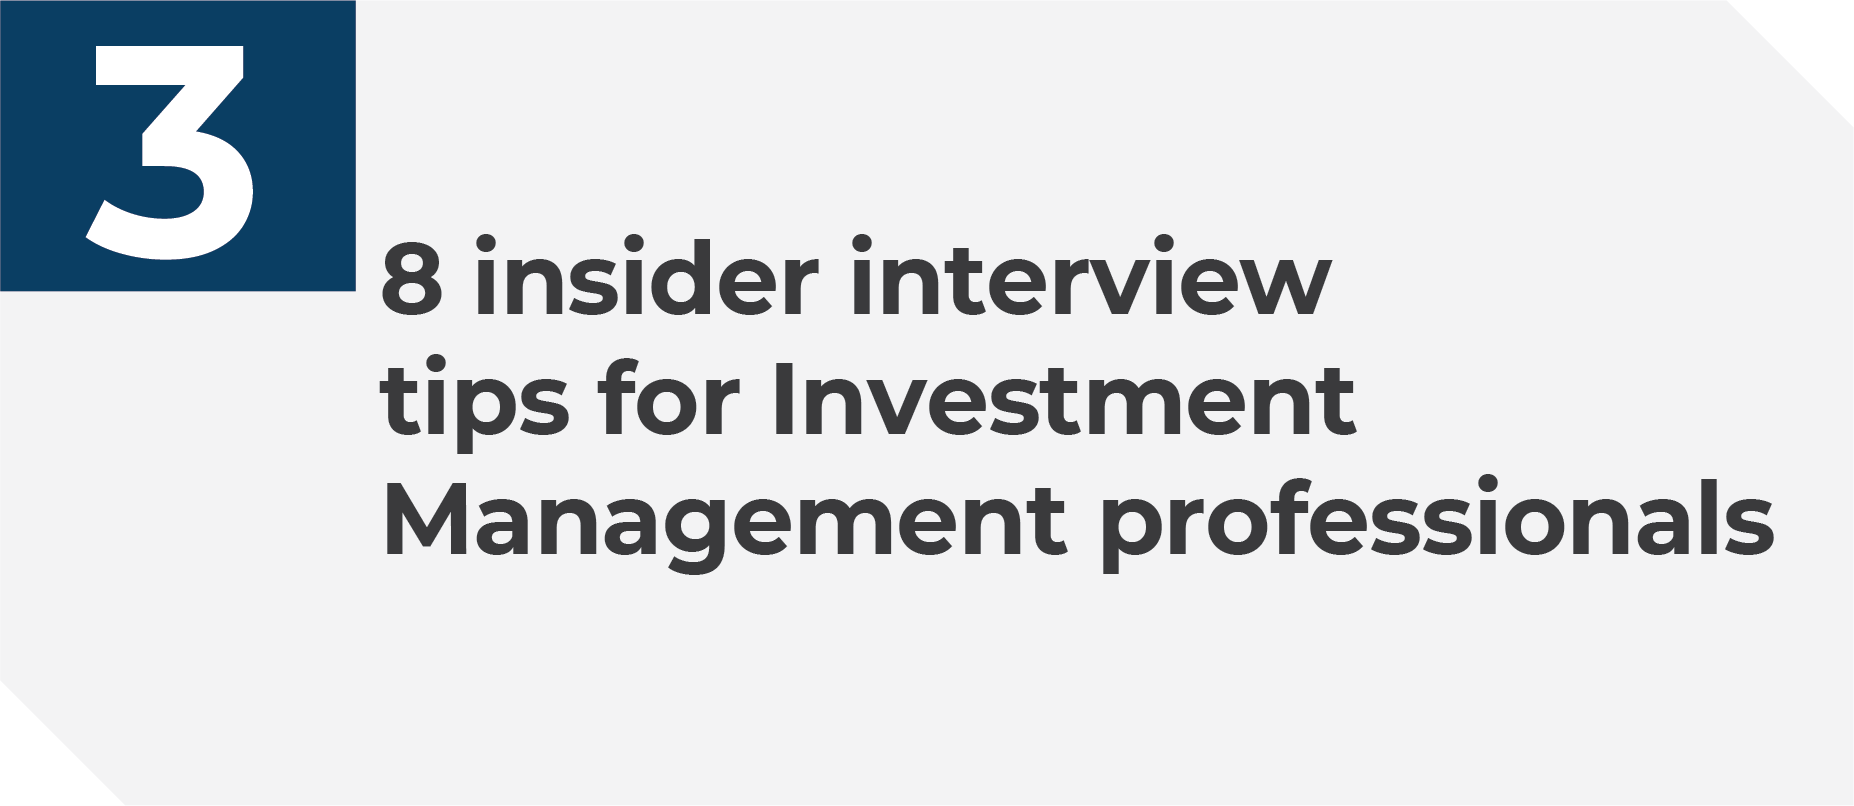 -8 insider interview tips for Investment Management professionals